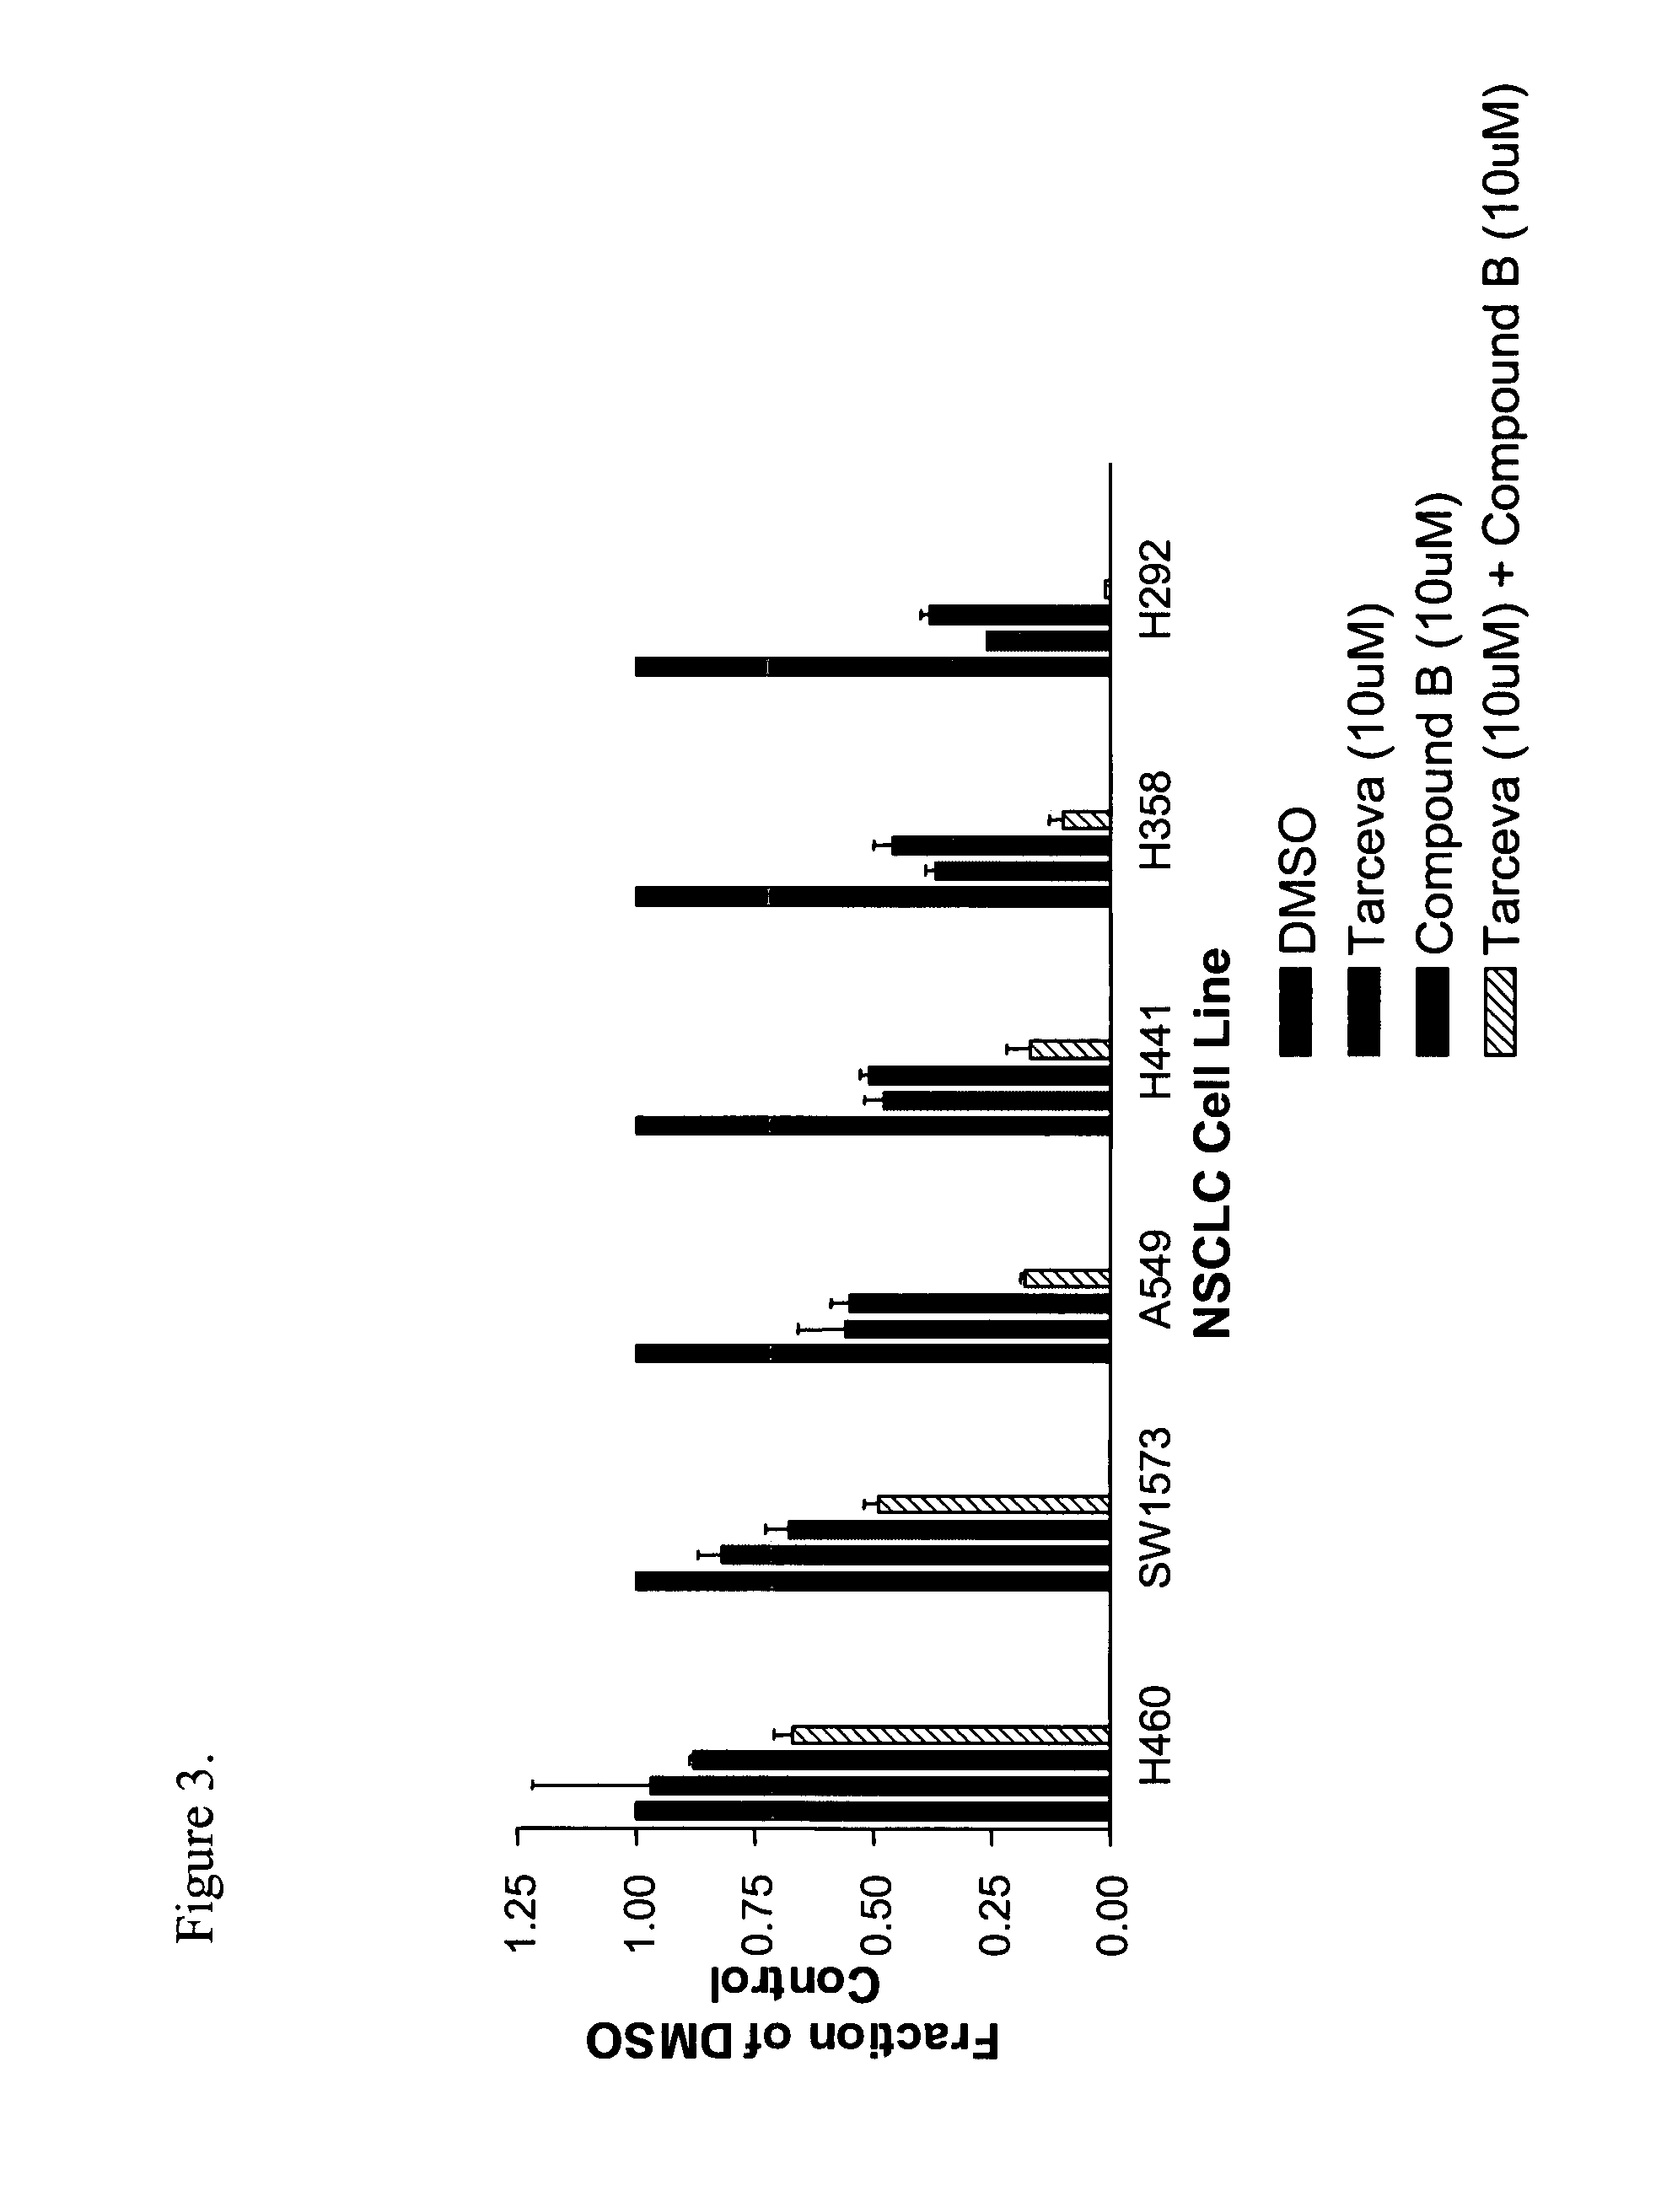 Combined treatment with 6,6-bicyclic ring substituted heterobicyclic protein kinase inhibitor and anti-cancer agents